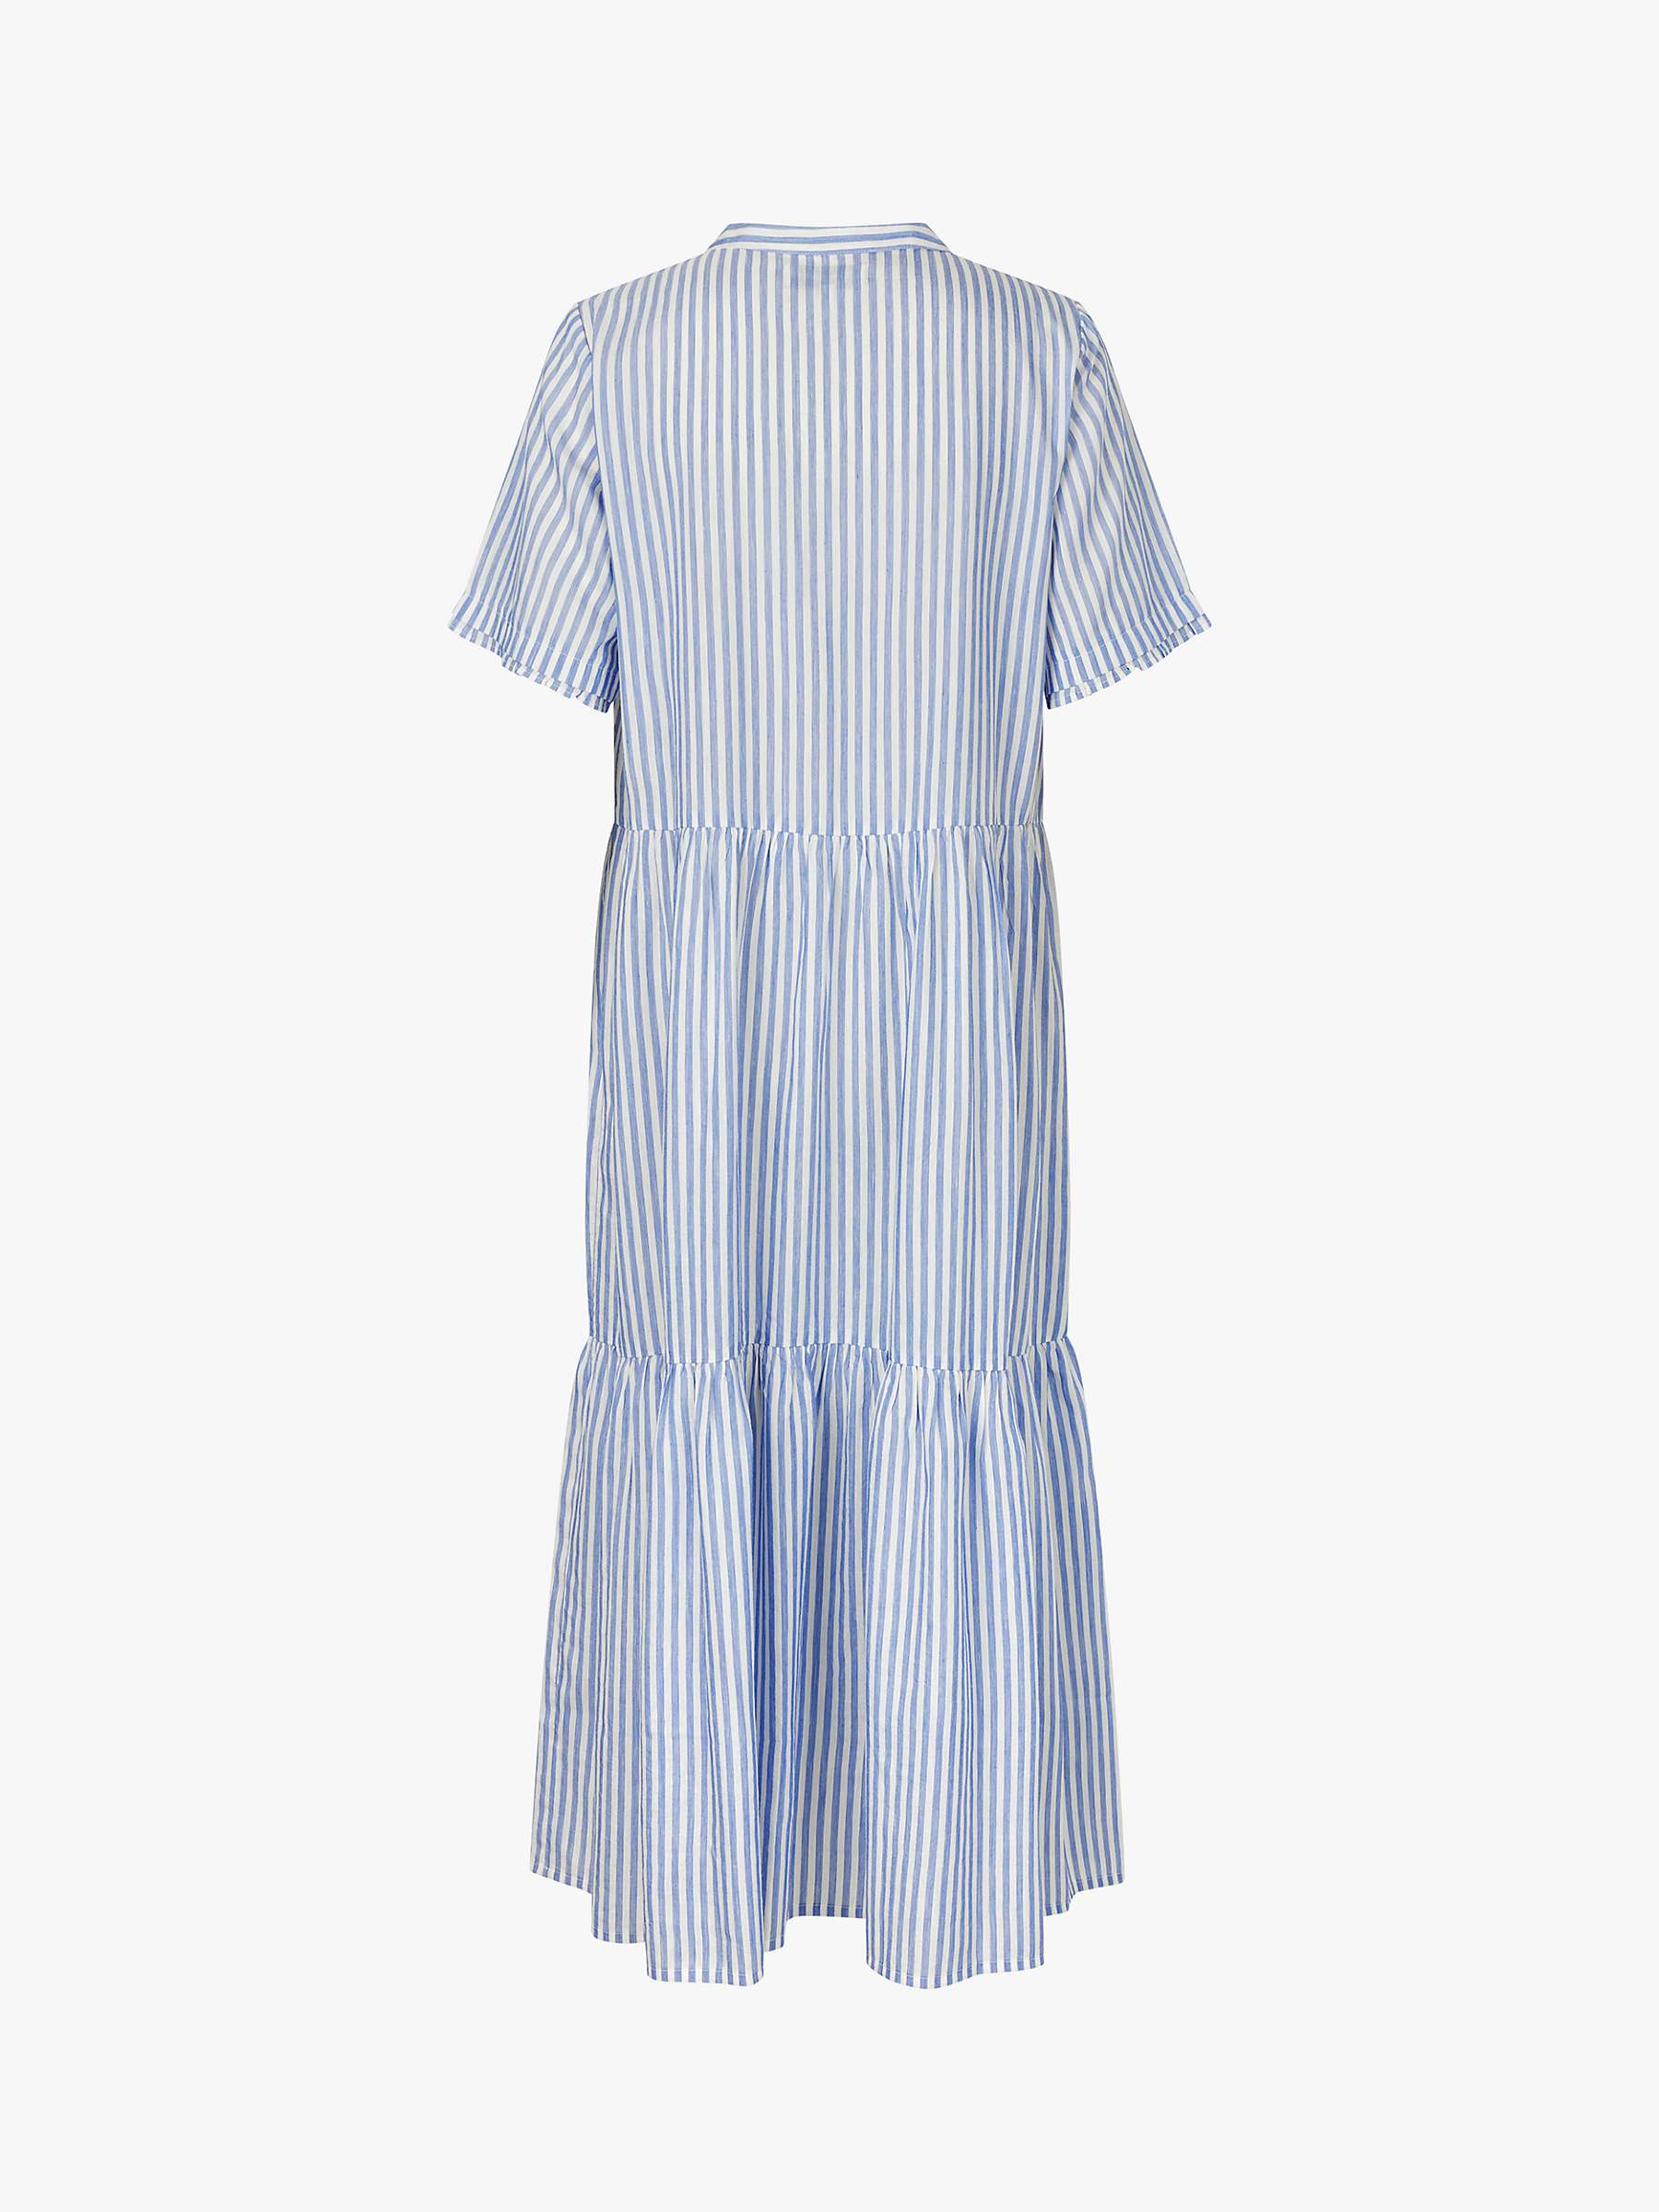 Buy Lollys Laundry Fie Striped Maxi Dress, White/Blue Online at johnlewis.com